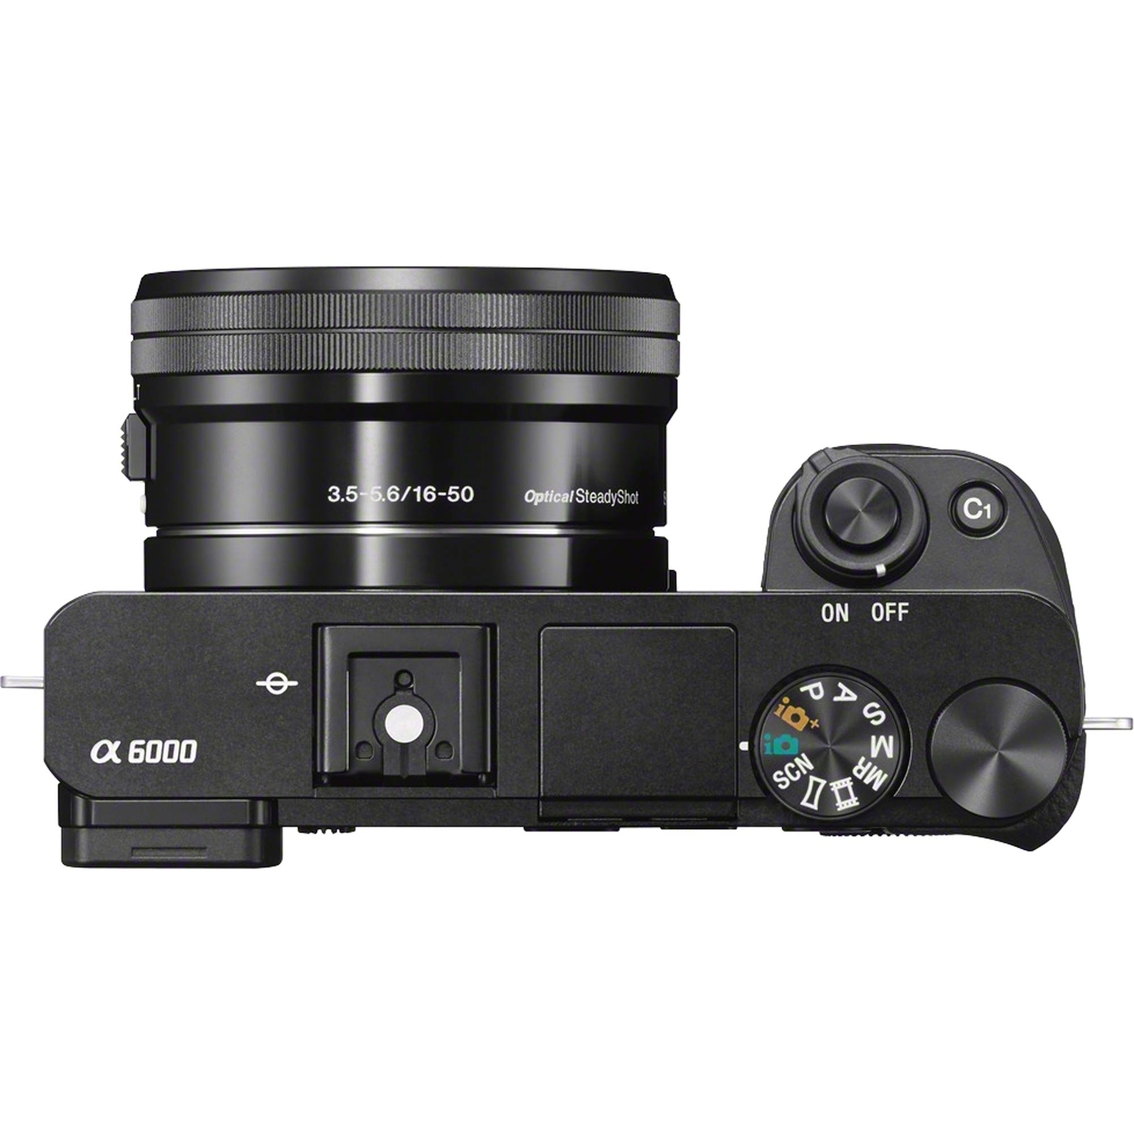 Sony Alpha a6000 24.3MP Mirrorless 16-50mm Camera with Interchangeable Lens - Image 3 of 4